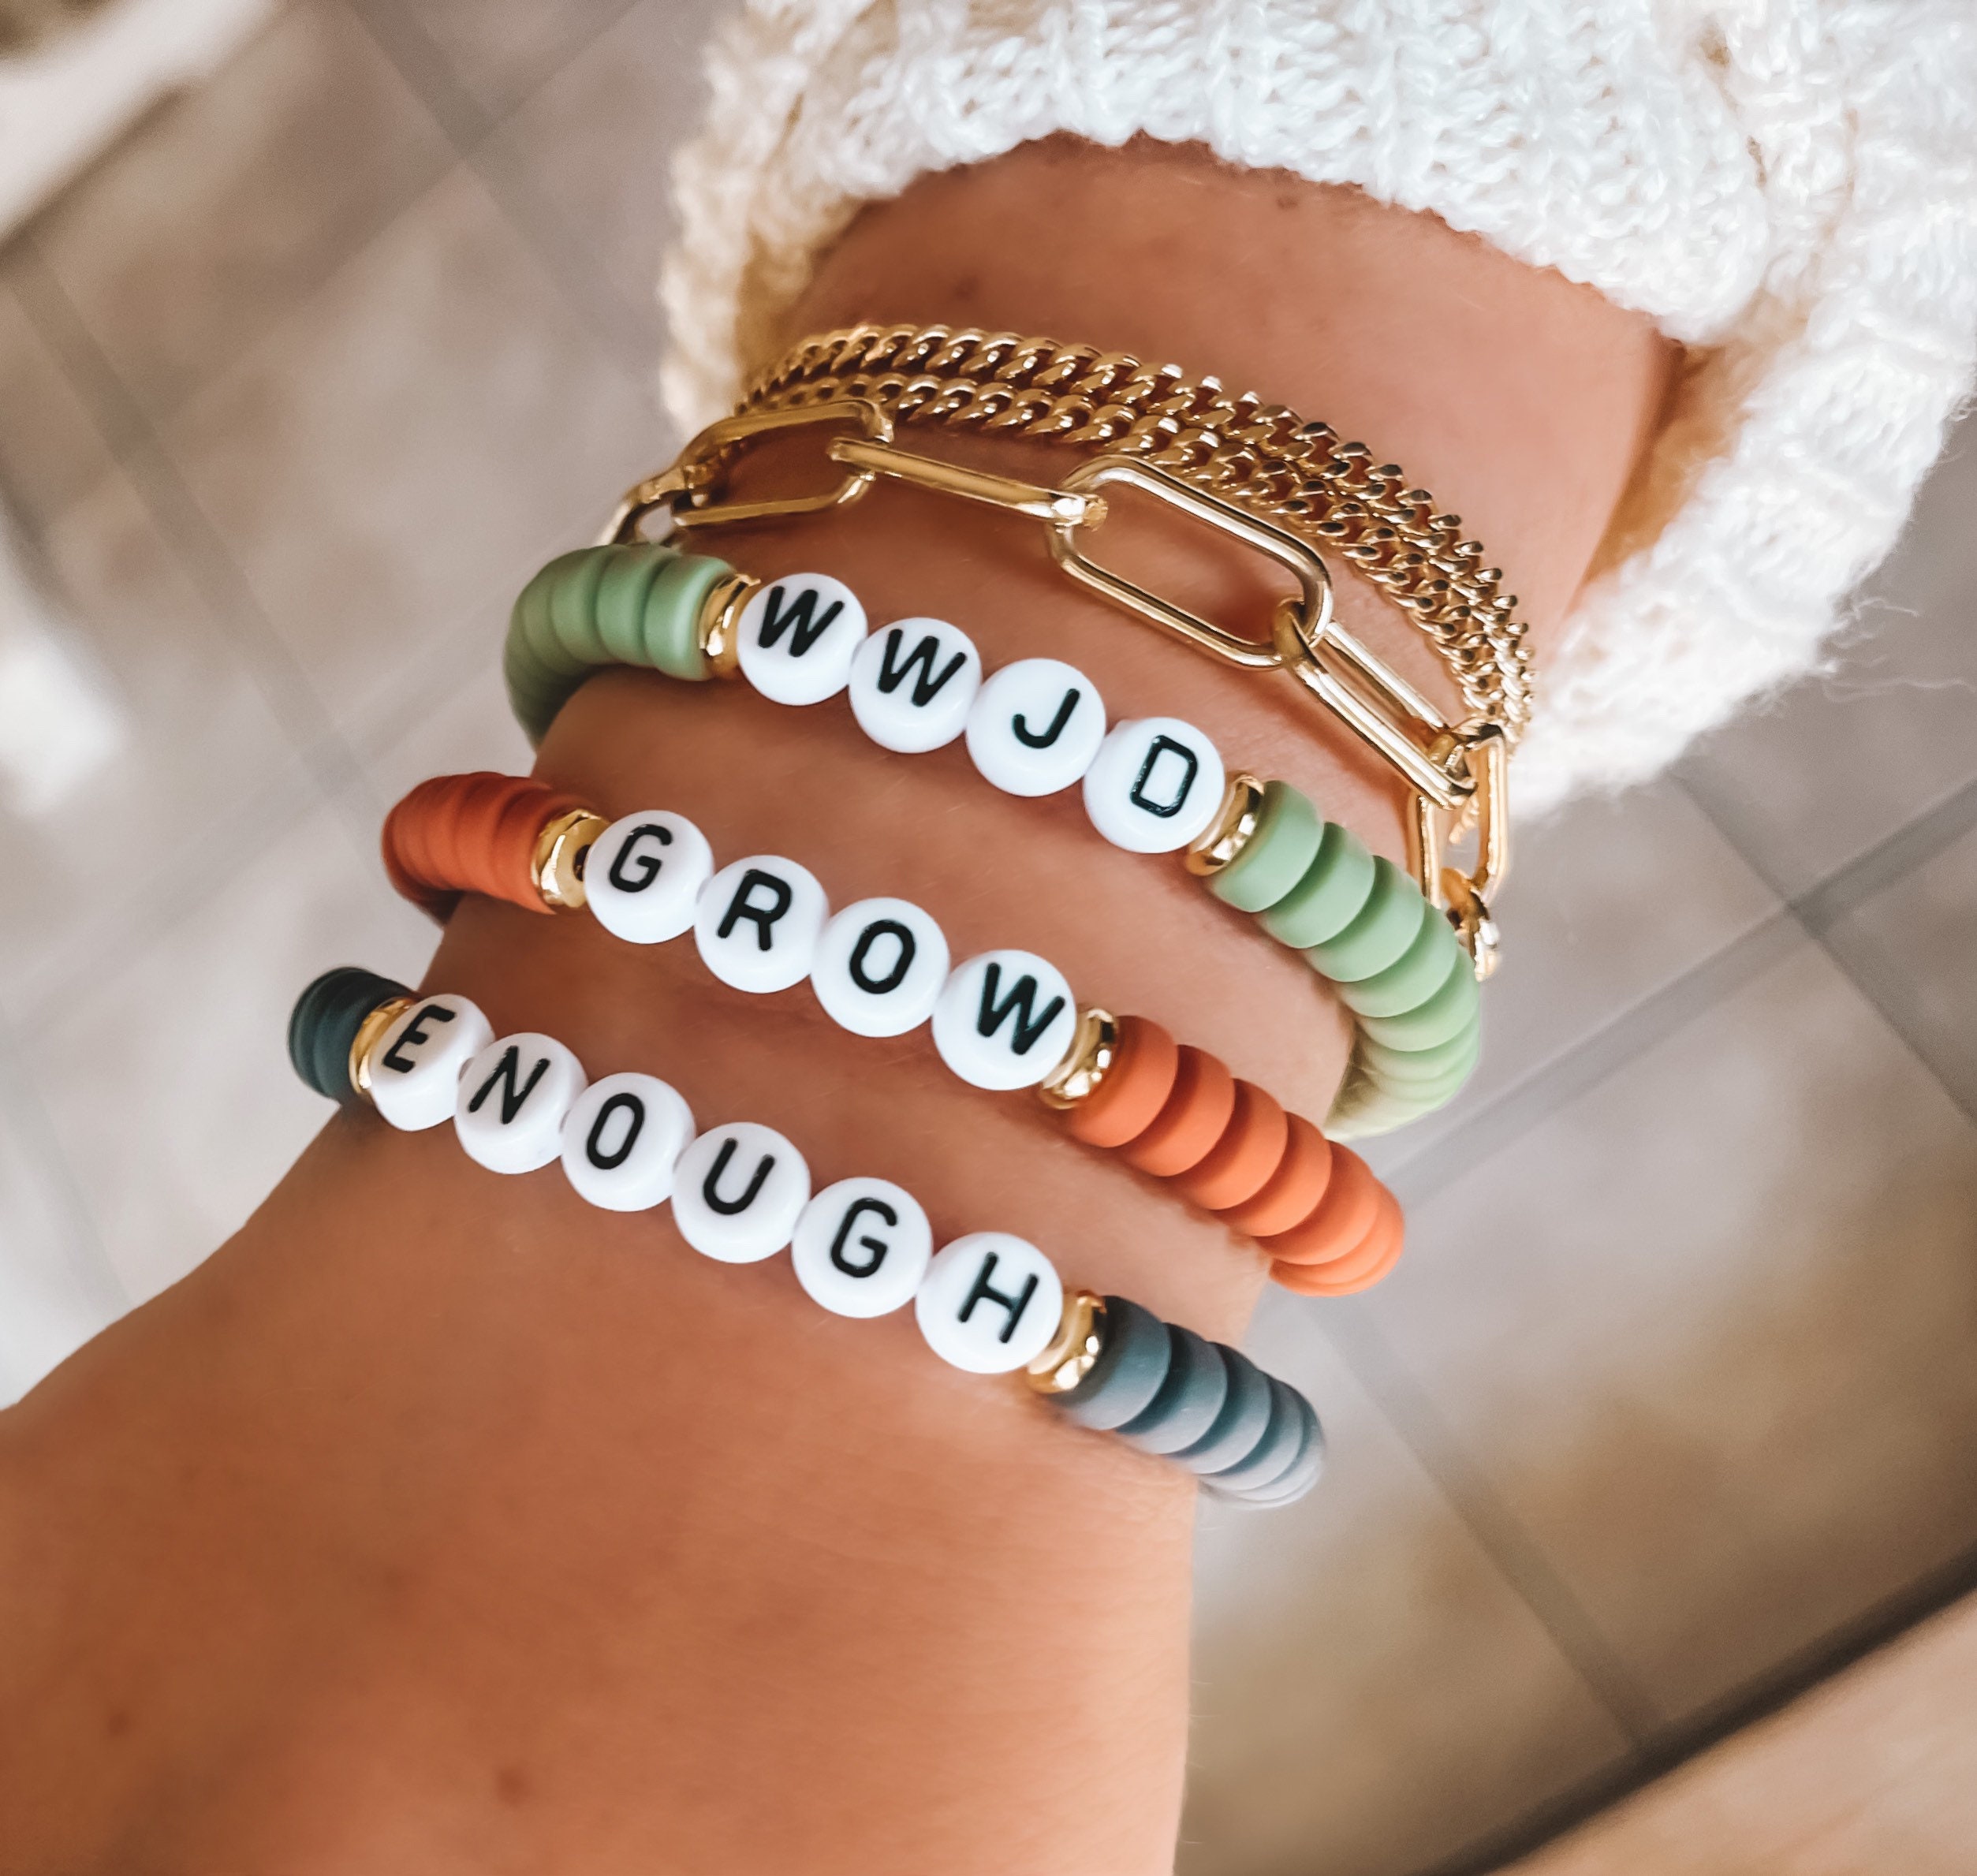 Buy Best Friends Personalized Name Bracelet Set Online in India - Etsy